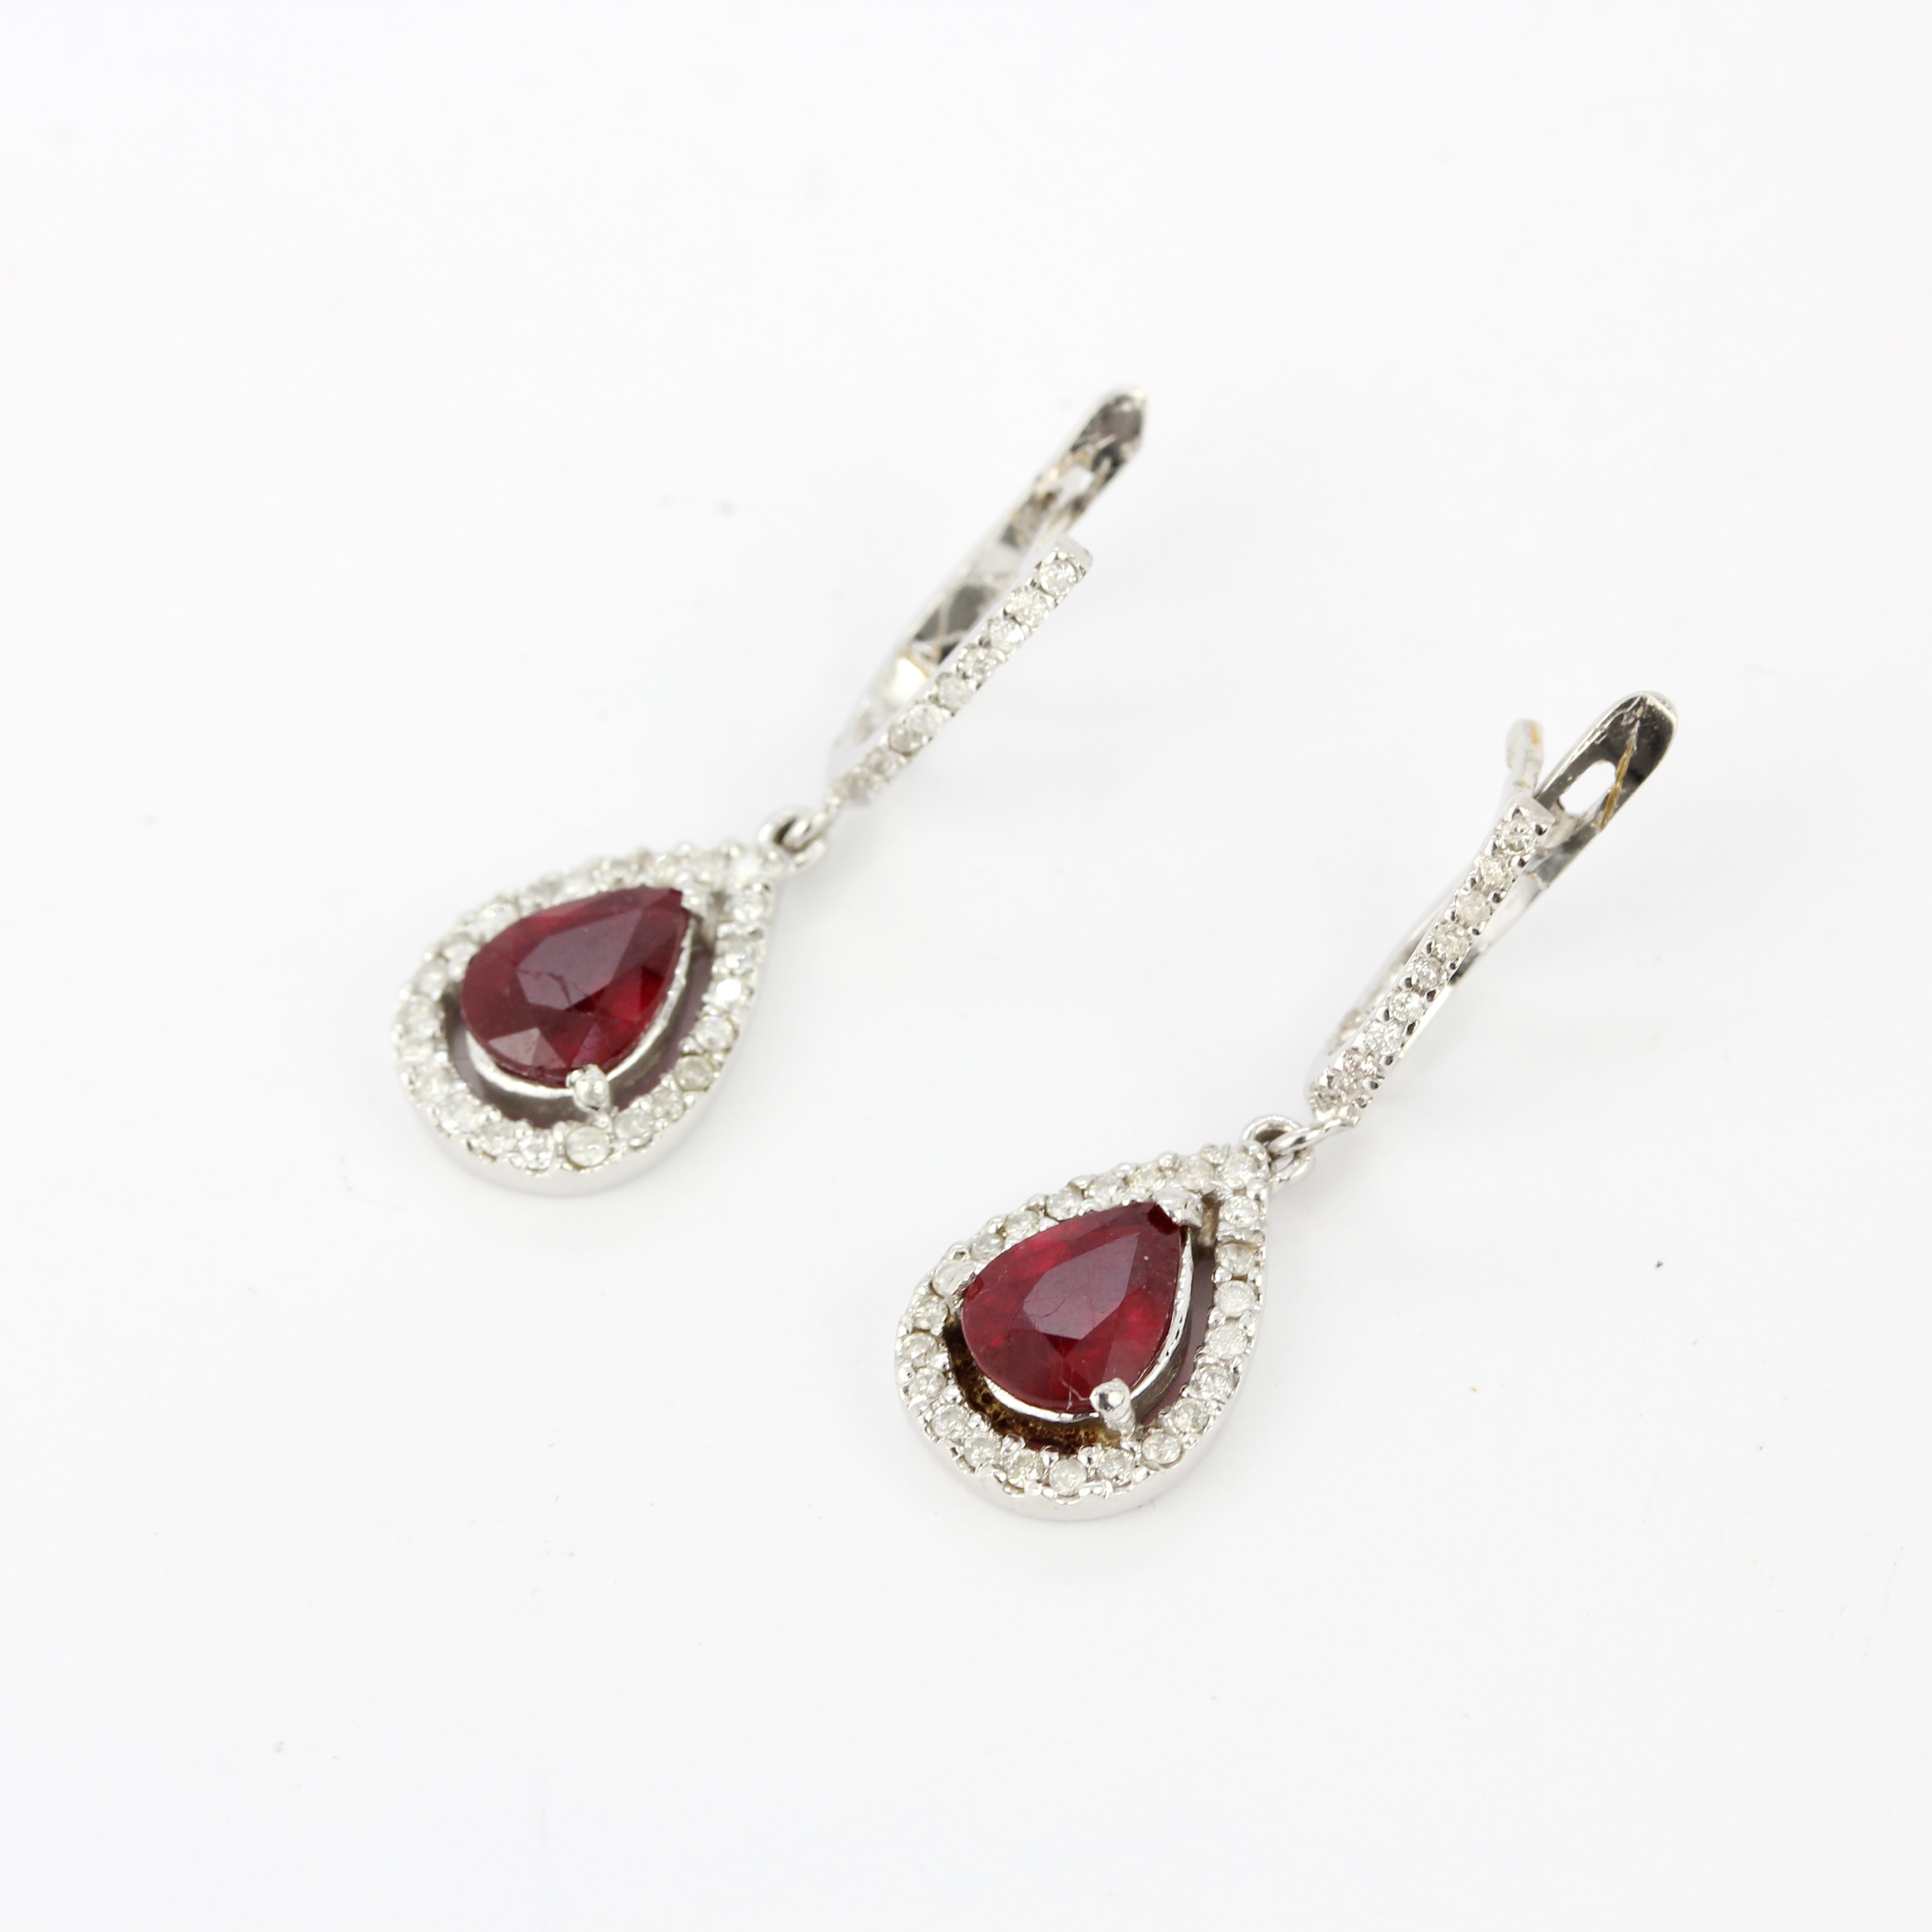 A pair of 18ct white gold drop earrings set with pear cut rubies and diamonds, L. 1.8cm. - Image 4 of 4